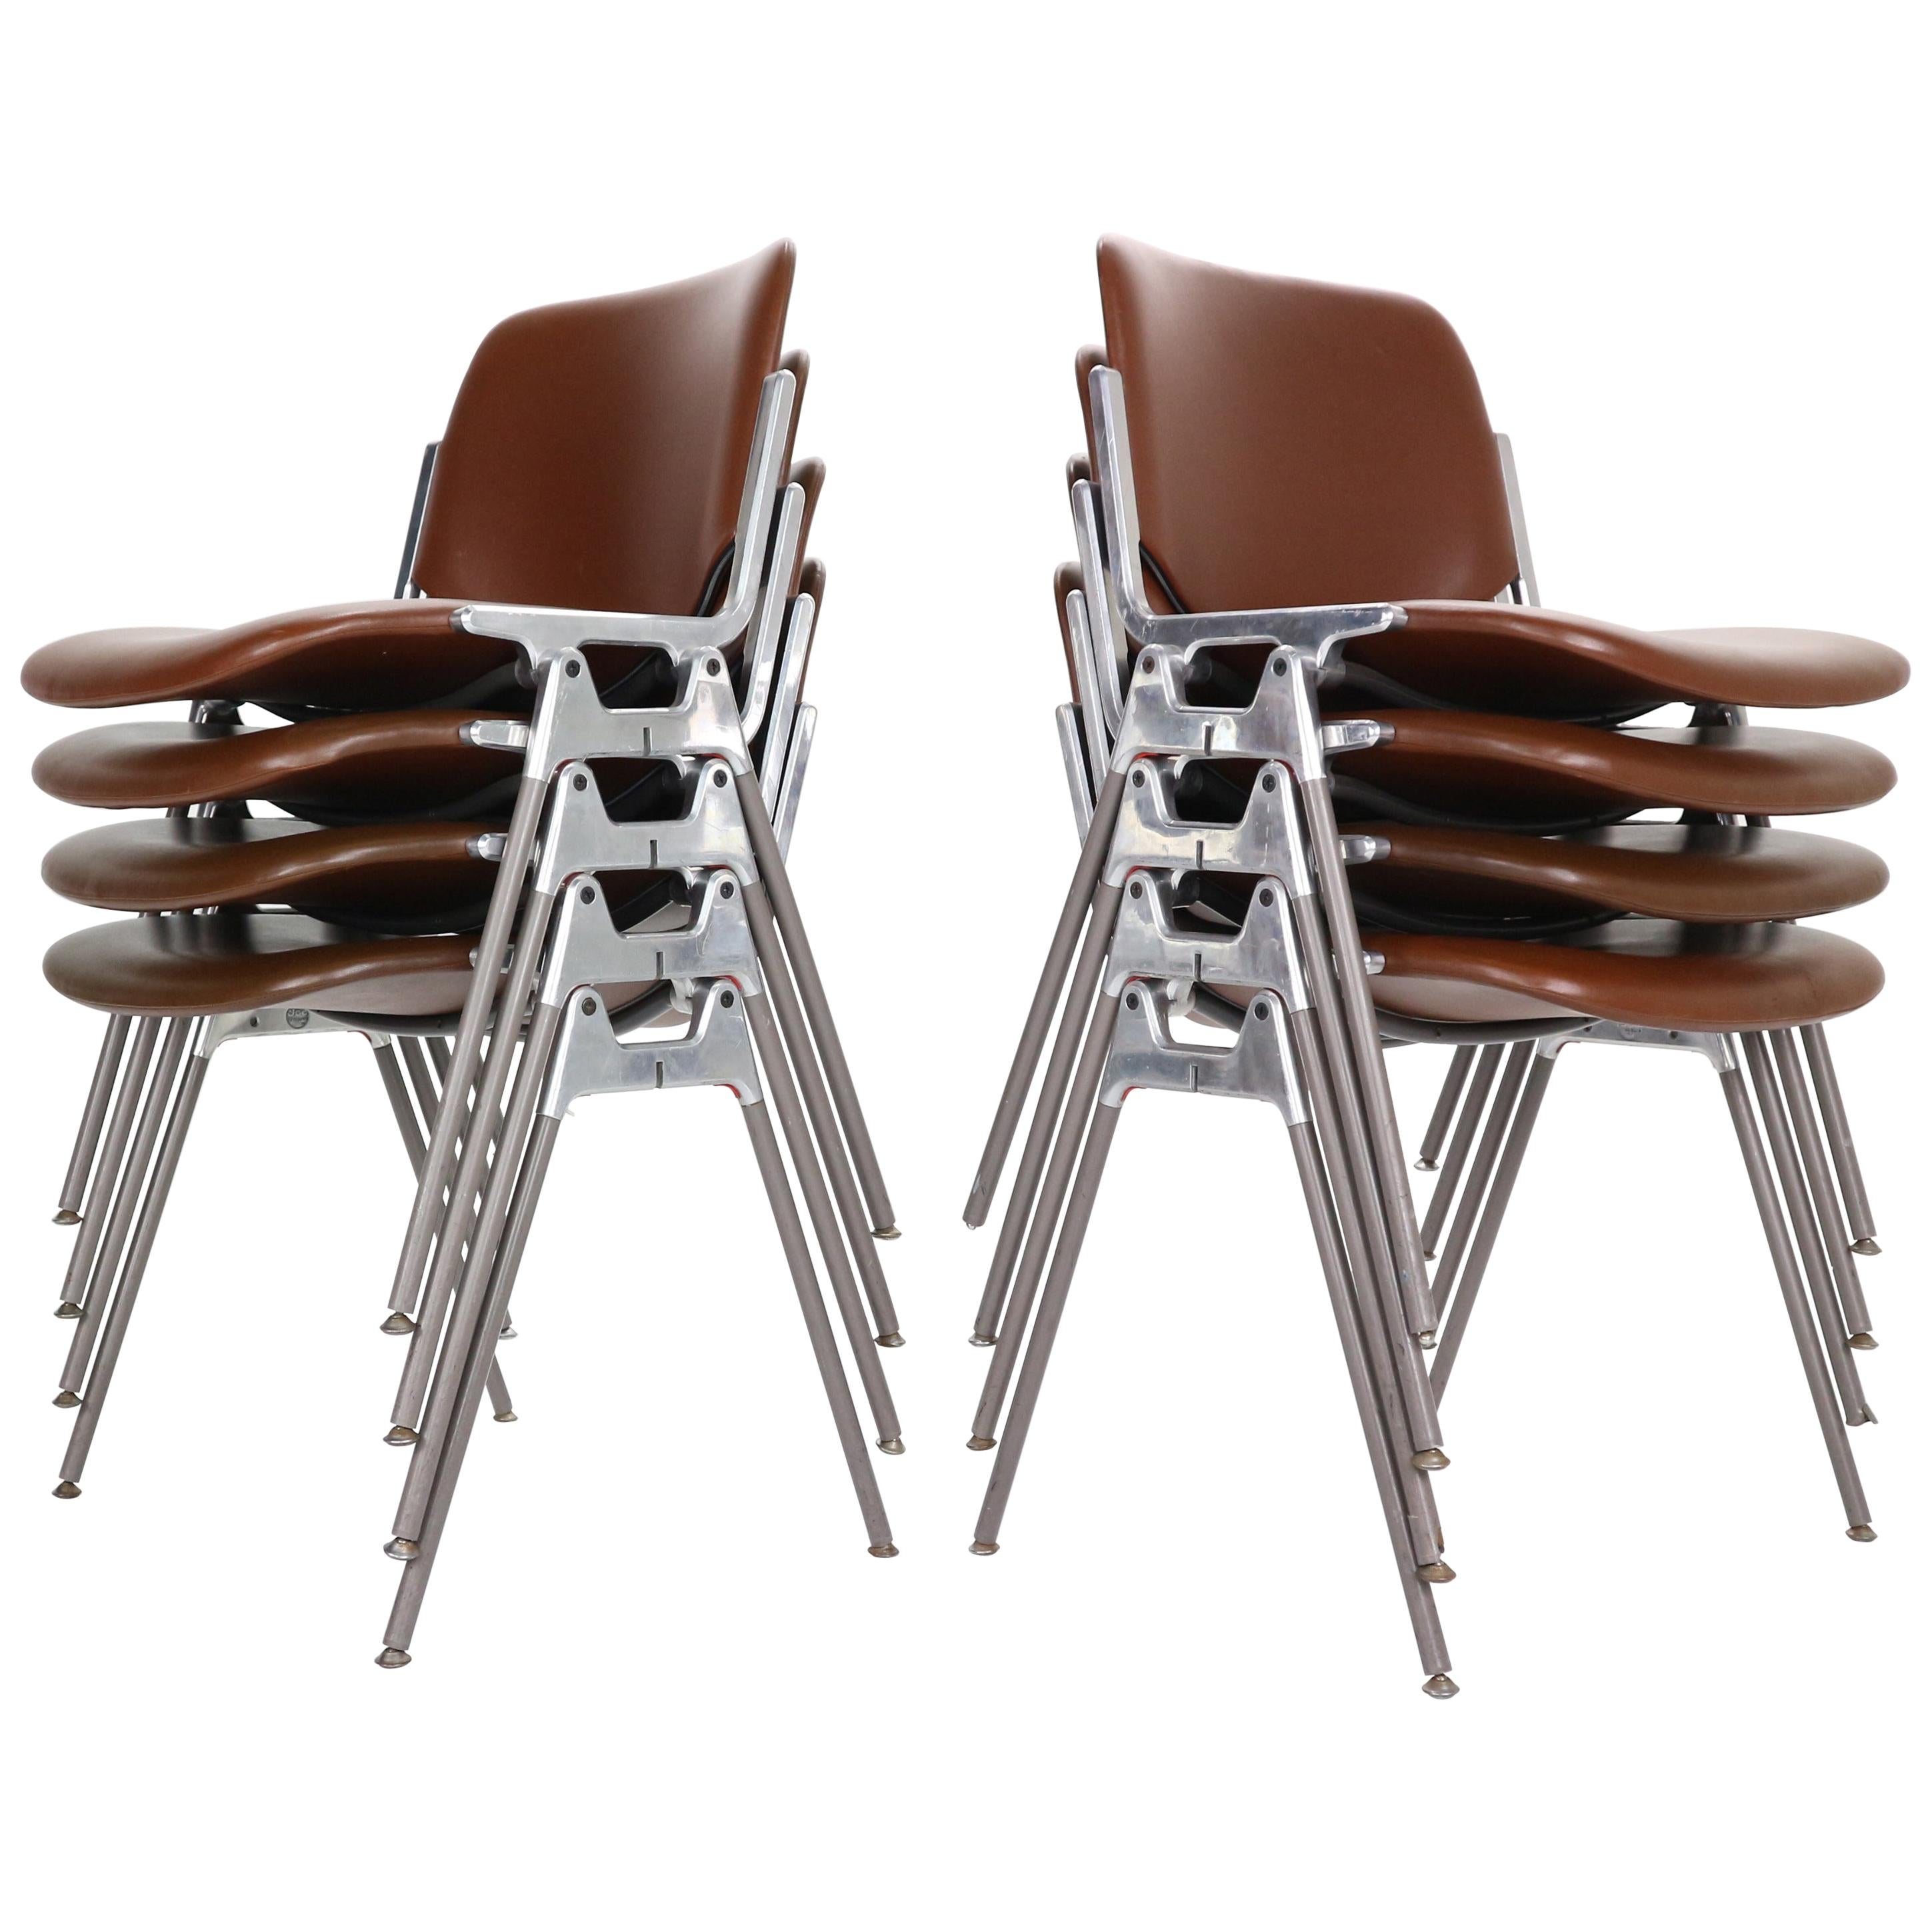 Giancarlo Piretti for Castelli Set of 8 Dinning Chairs "DSC 106", 1960s, Italy